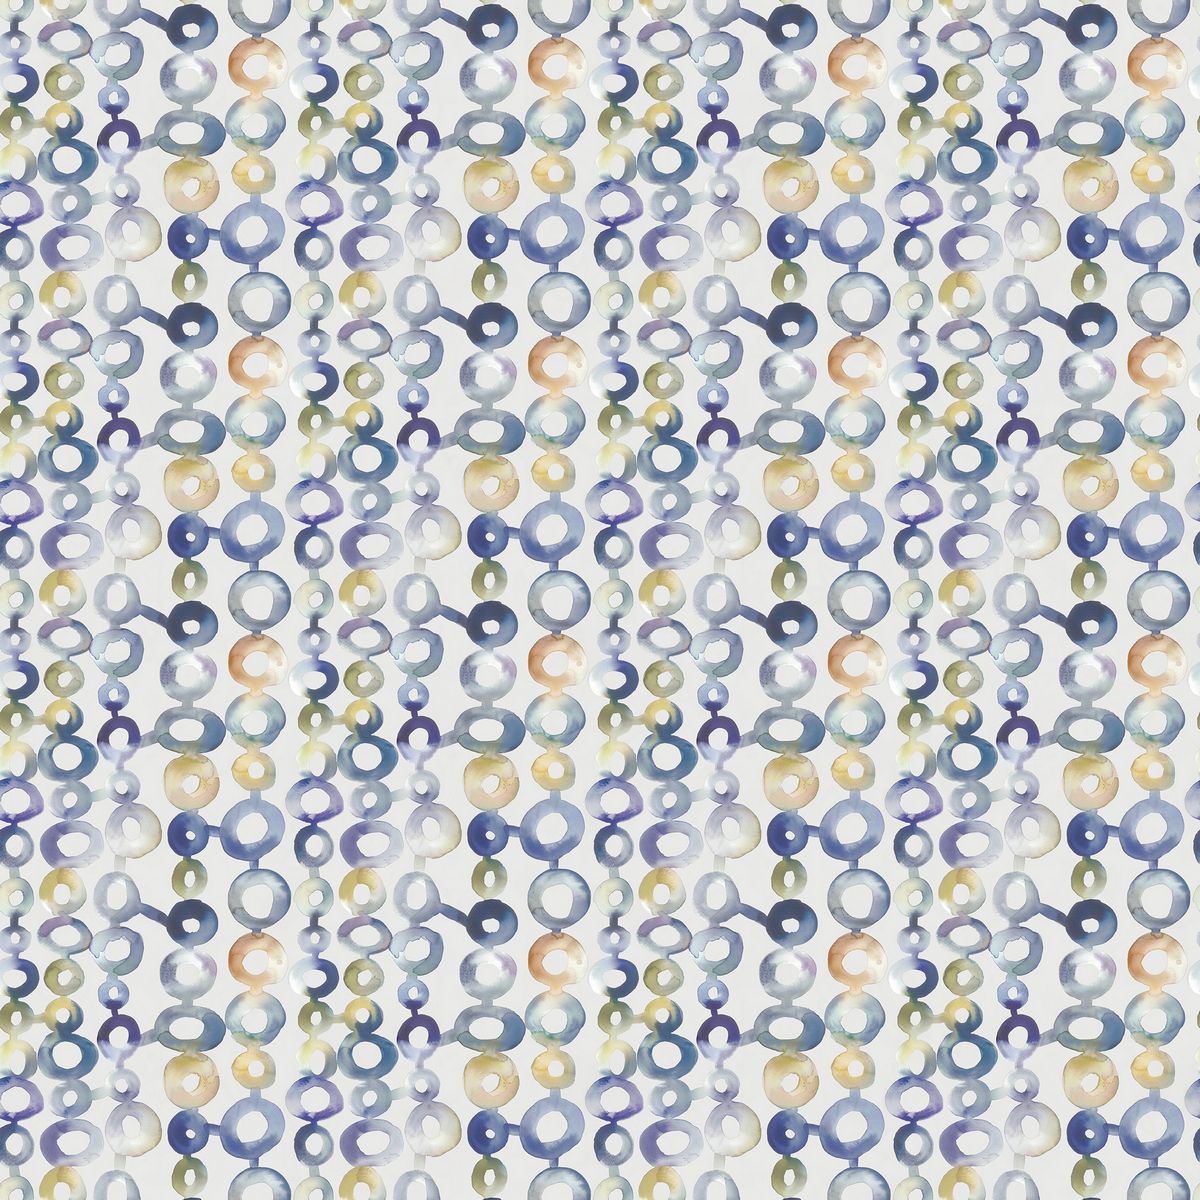 Macapa Clementine Fabric by Voyage Maison